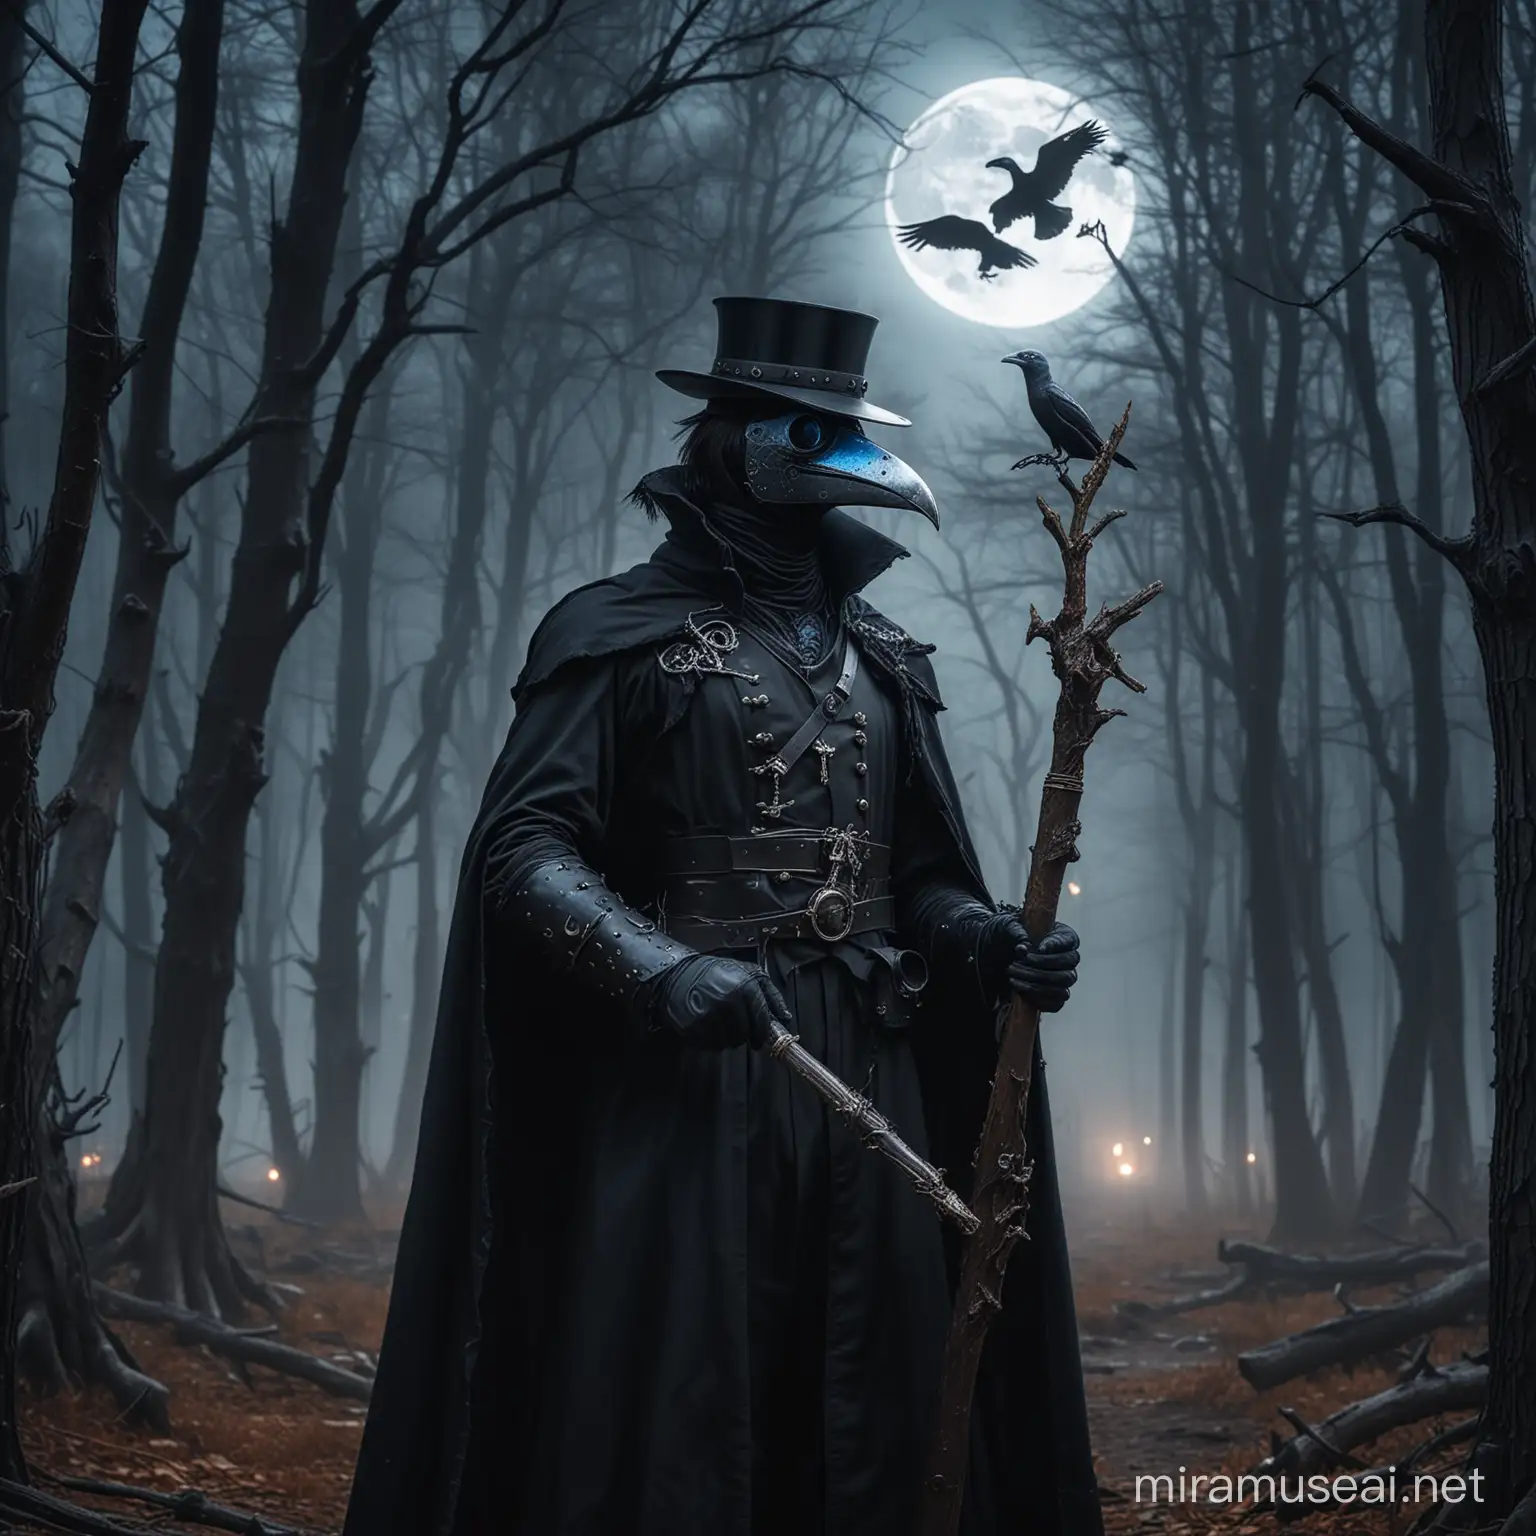 a steampunk plague doctor in black clothing with blazing blue eyes shining through raven mask, bearing the staff of hermes in a haughty pose in a dark forest with dry trees and a full moon, high quality, rich in details